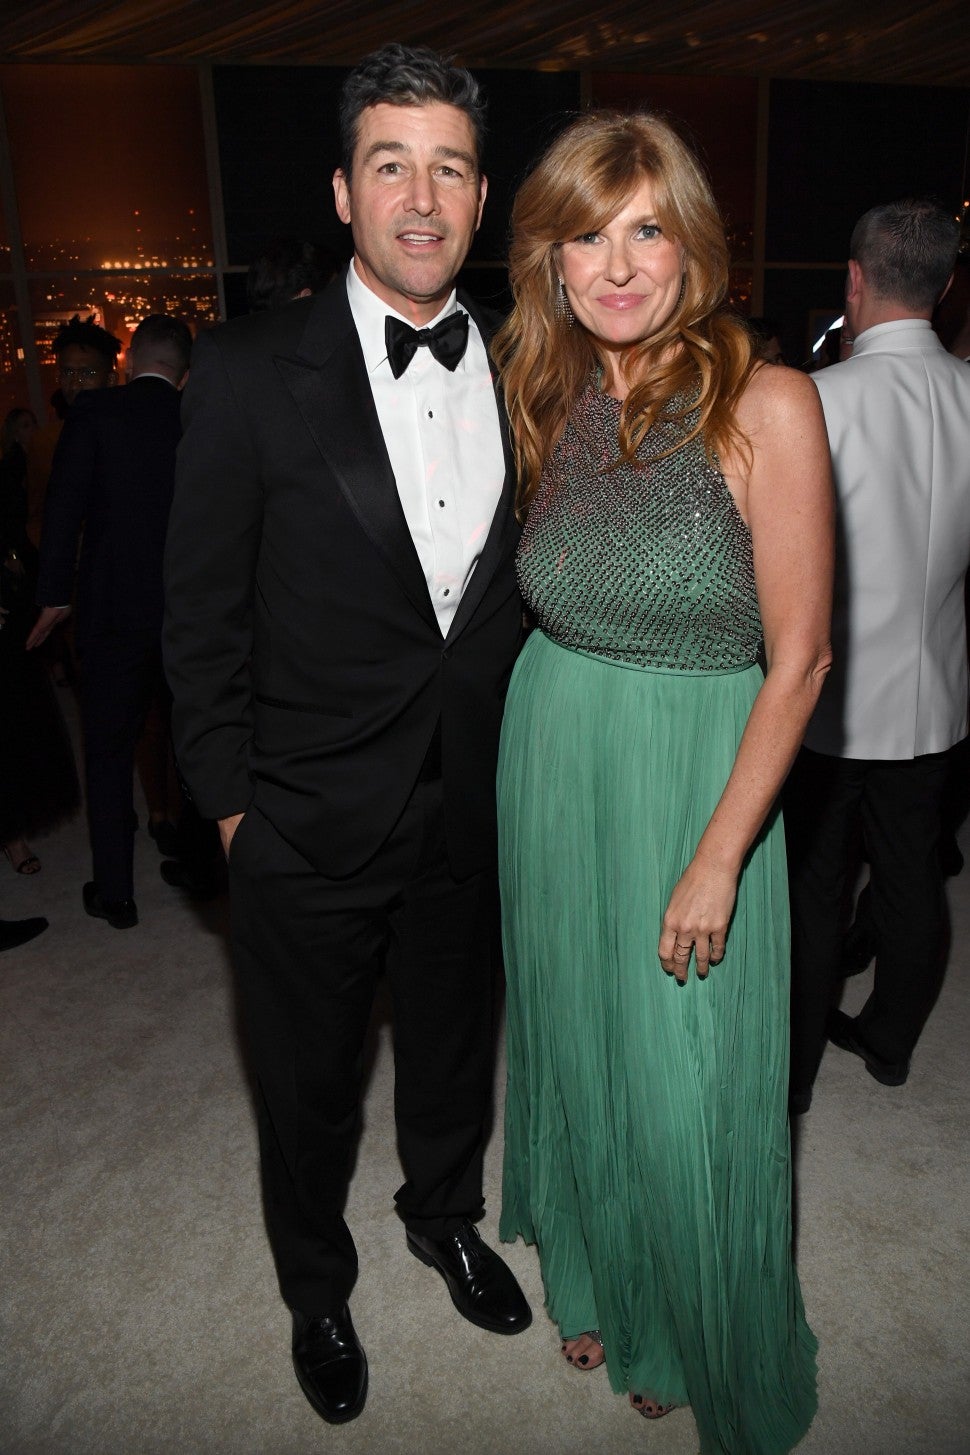 Kyle Chandler and Connie Britton at 2020 golden globe afterparty